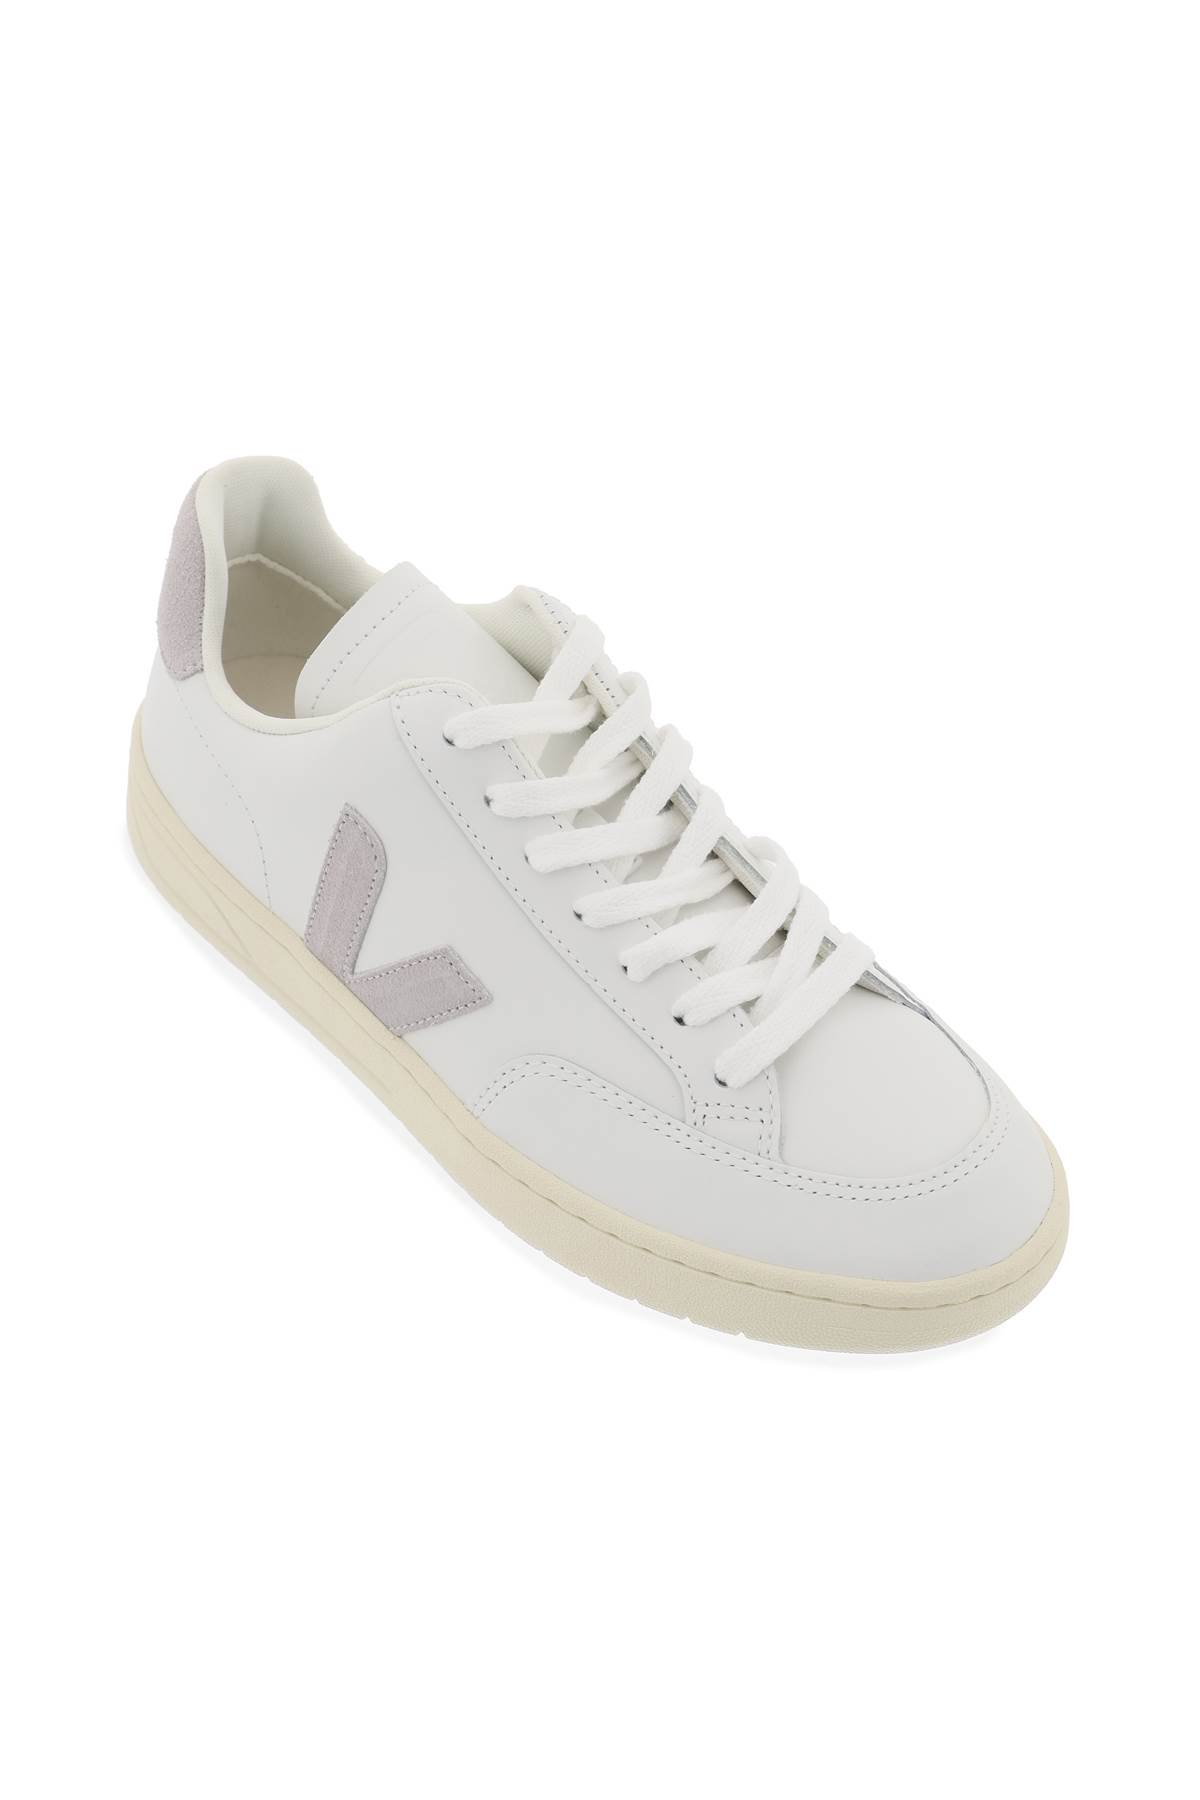 Shop Veja Leather V-12 Sneakers In Extra White Light Grey (white)